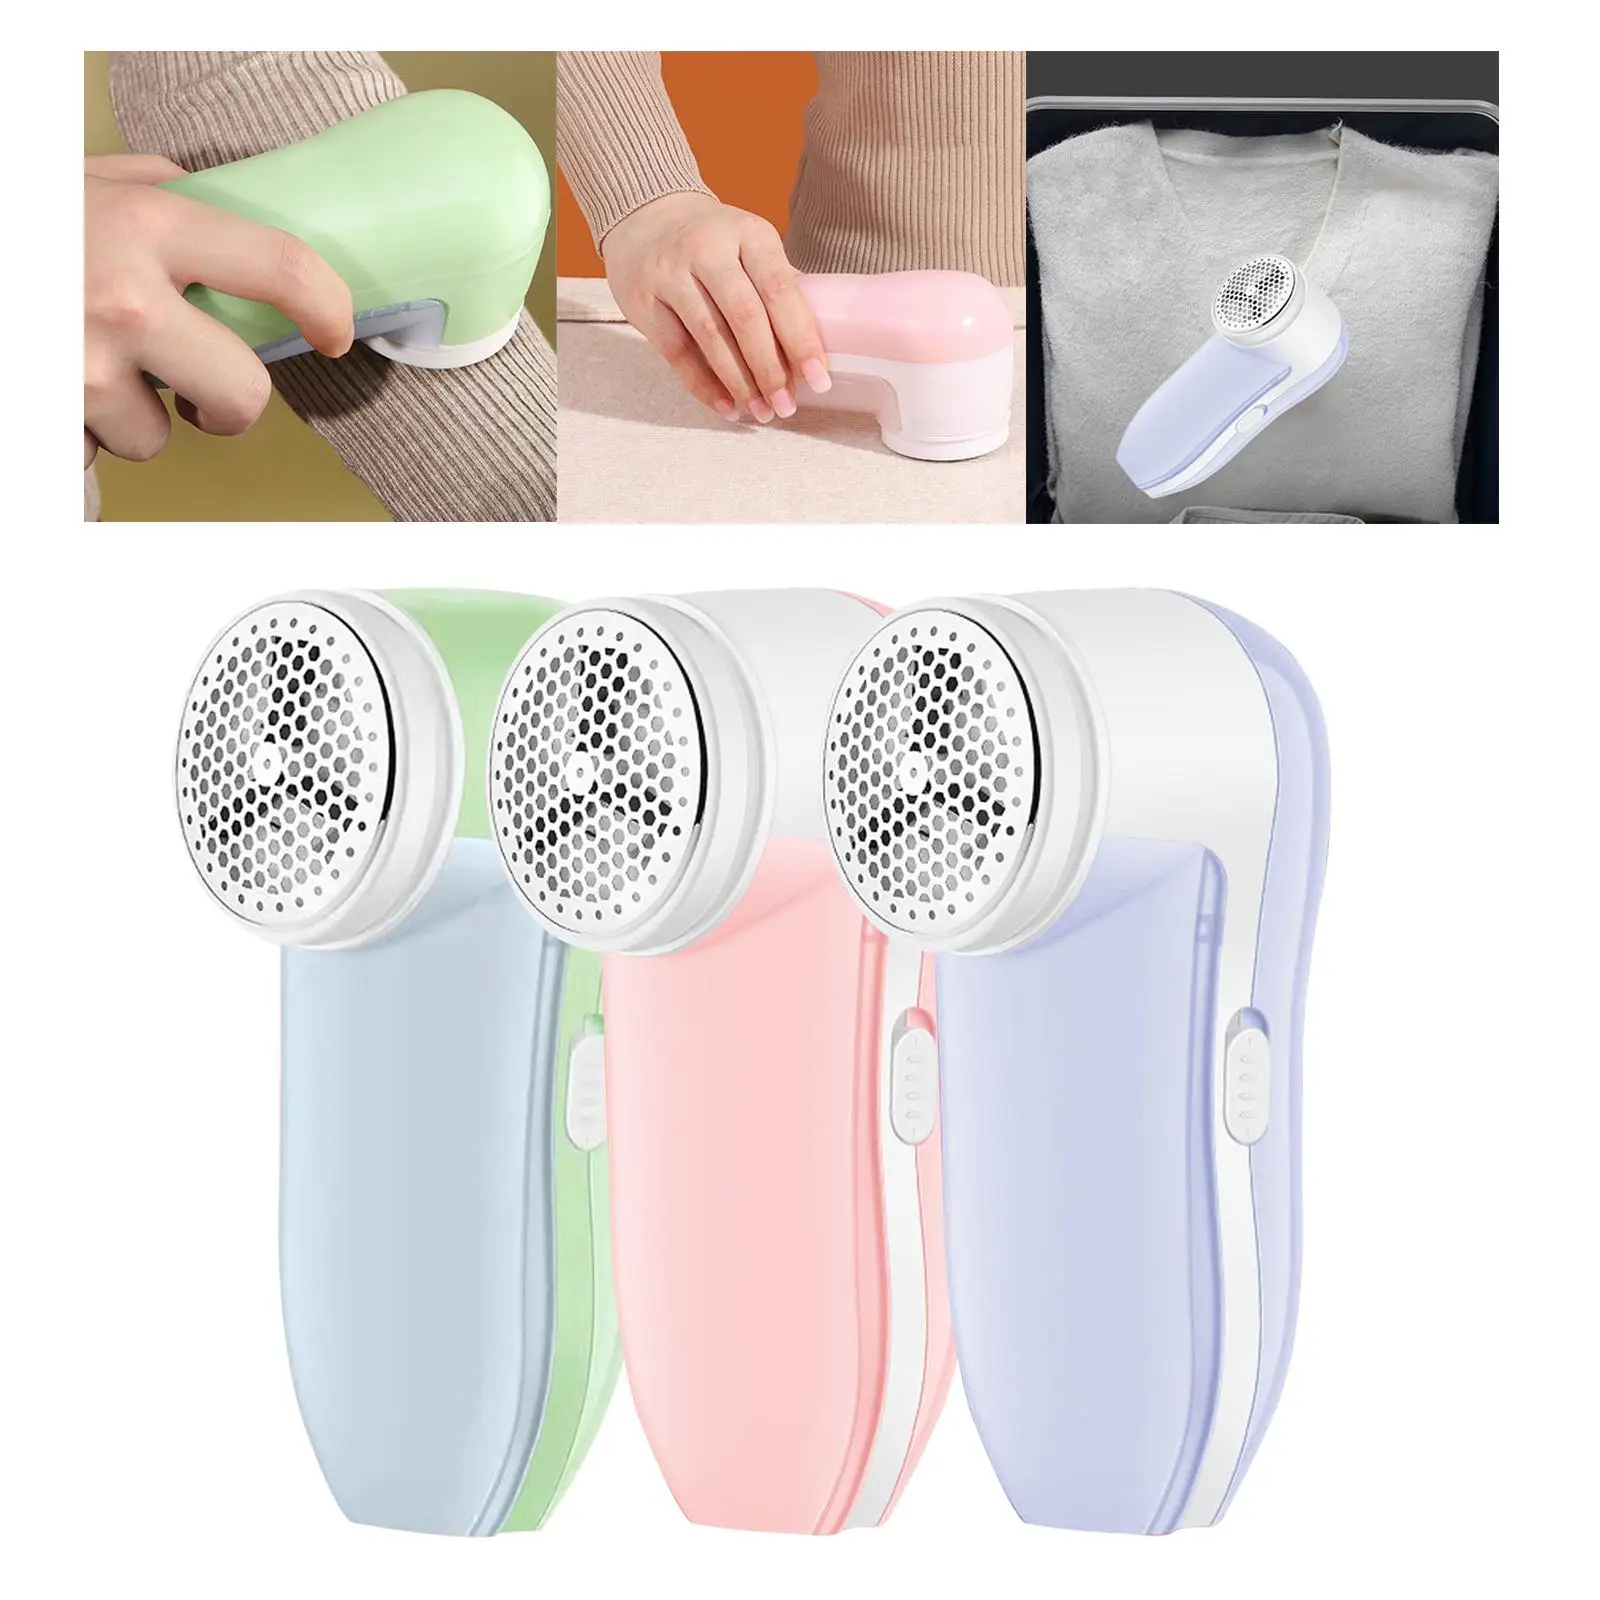 Lint Remover USB Trimmer Shaver Sweater Shaver Defuzzer for Cotton Synthetic Fibers